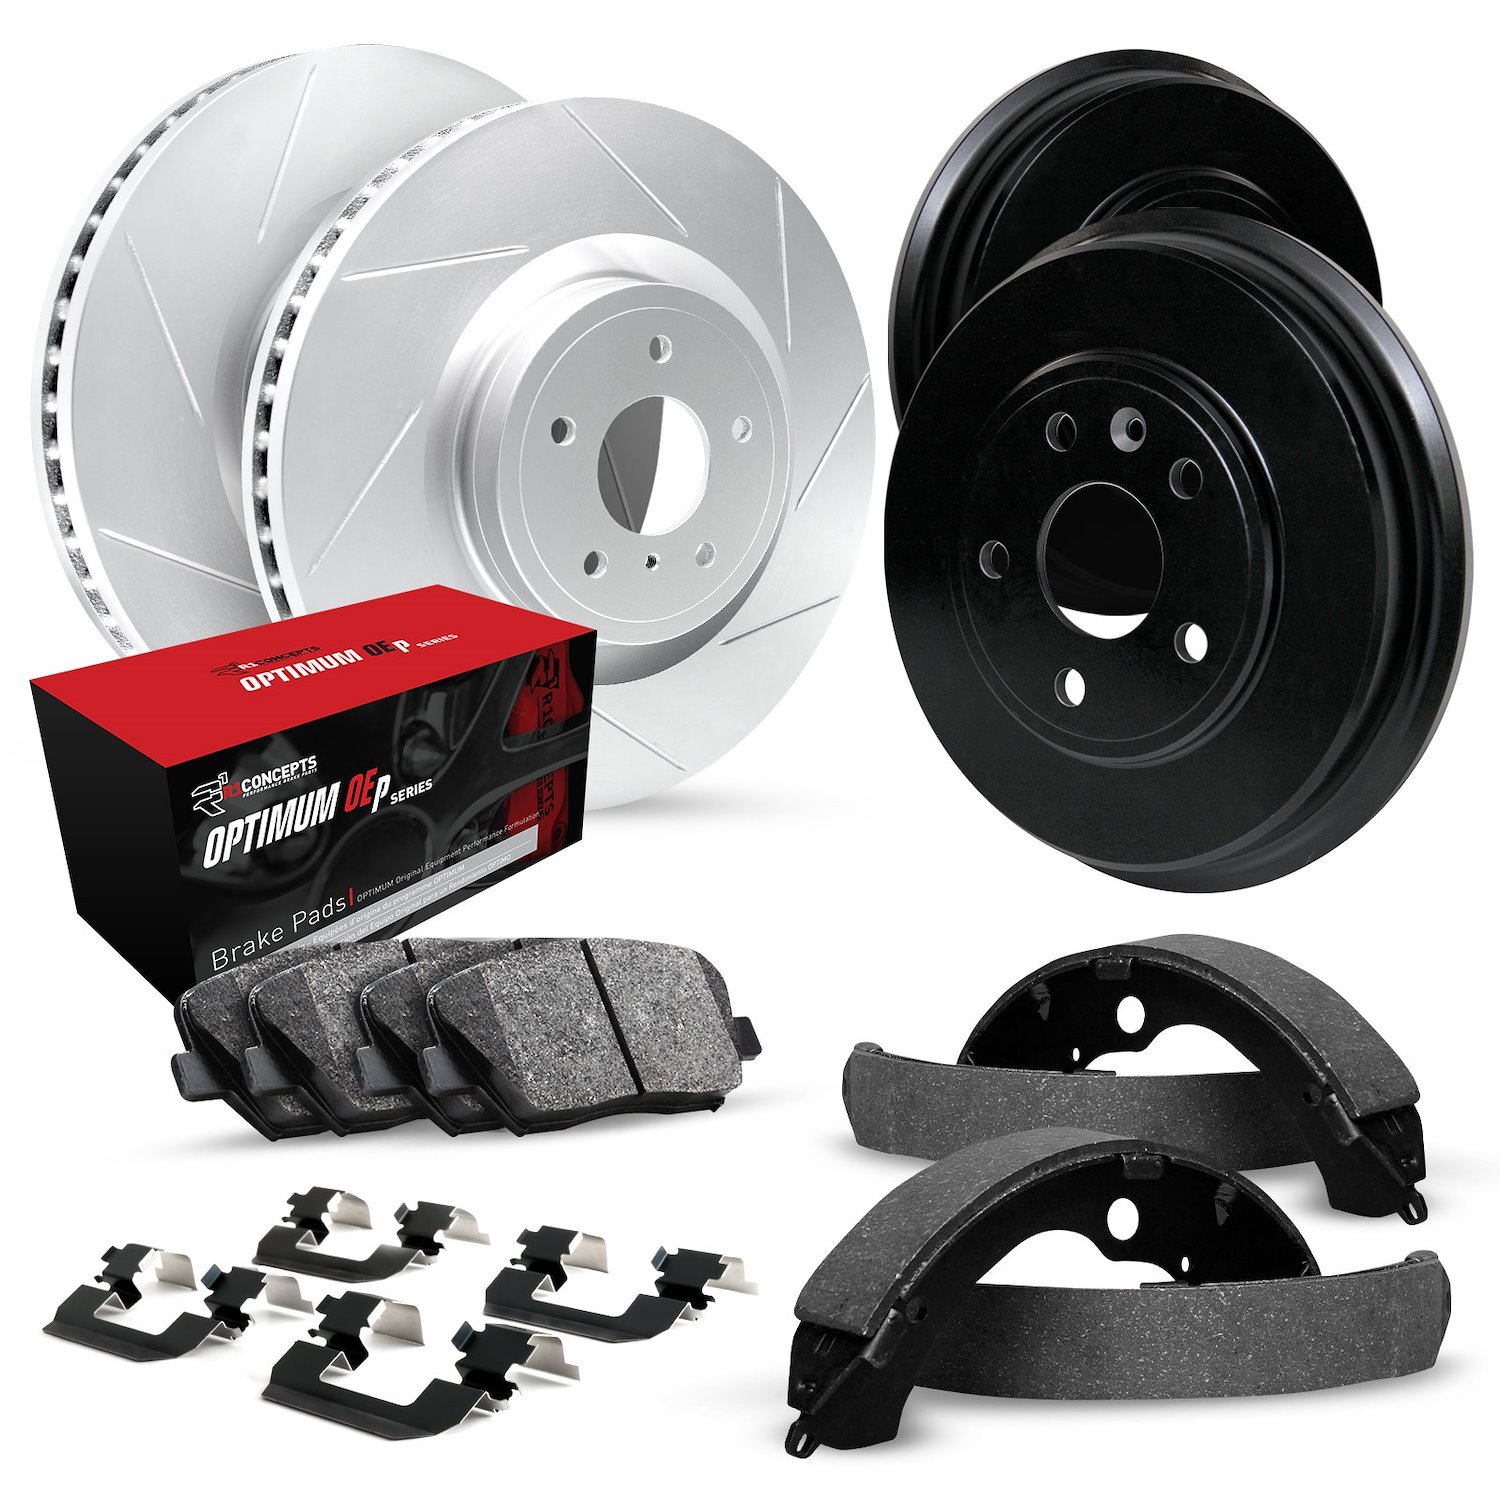 GEO-Carbon Slotted Brake Rotor & Drum Set w/Optimum OE Pads, Shoes, & Hardware, 1990-1995 GM, Position: Front & Rear